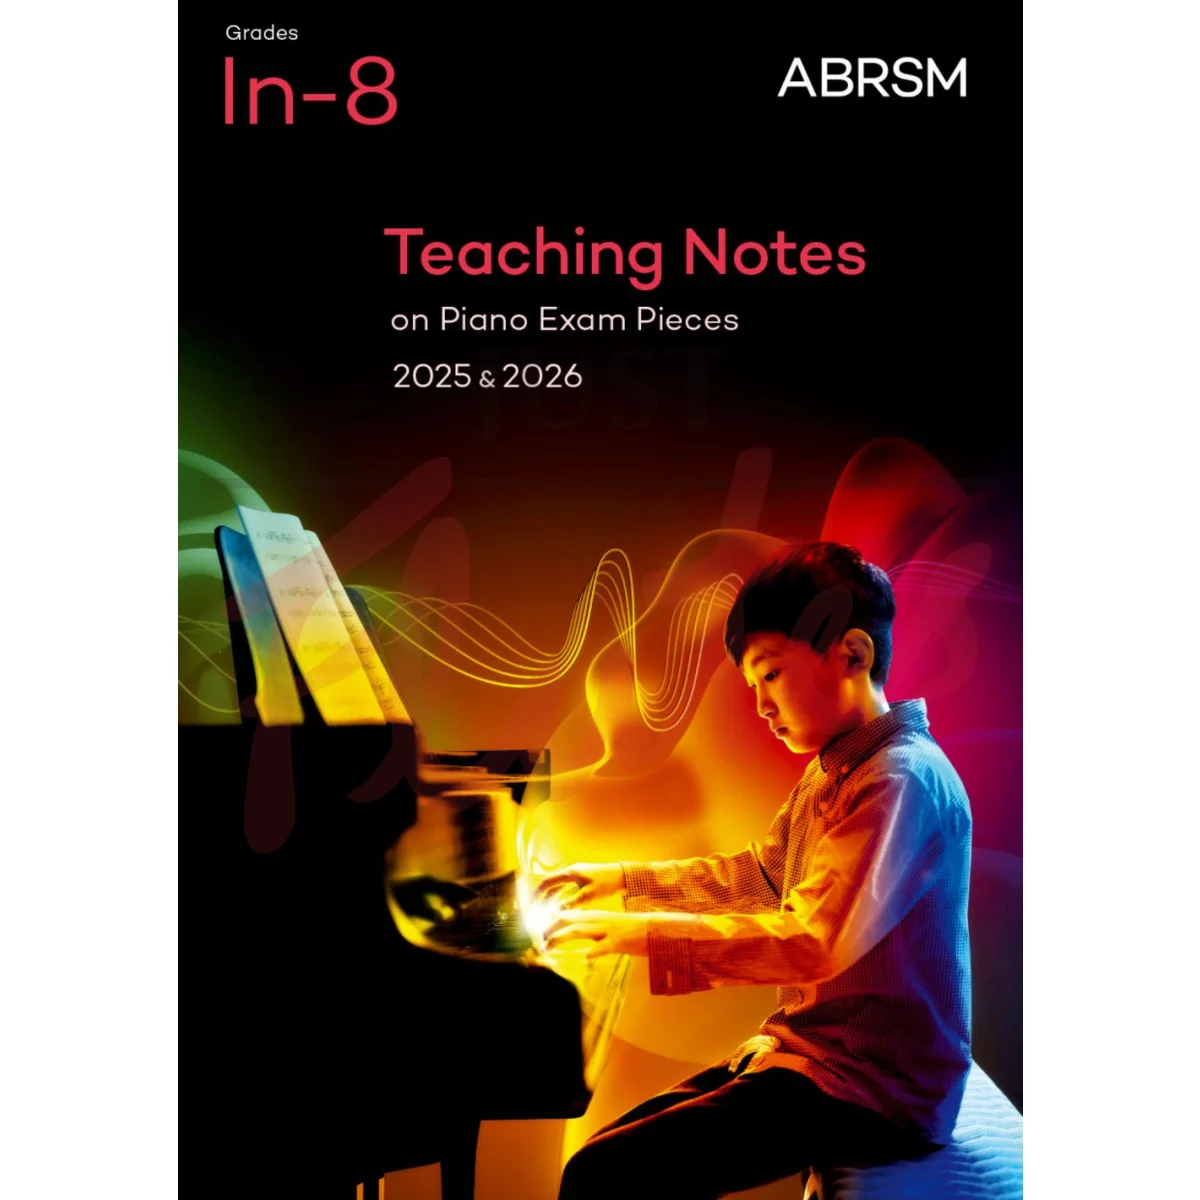 Teaching Notes On Piano Exam Pieces 2025-26, Grades In-8